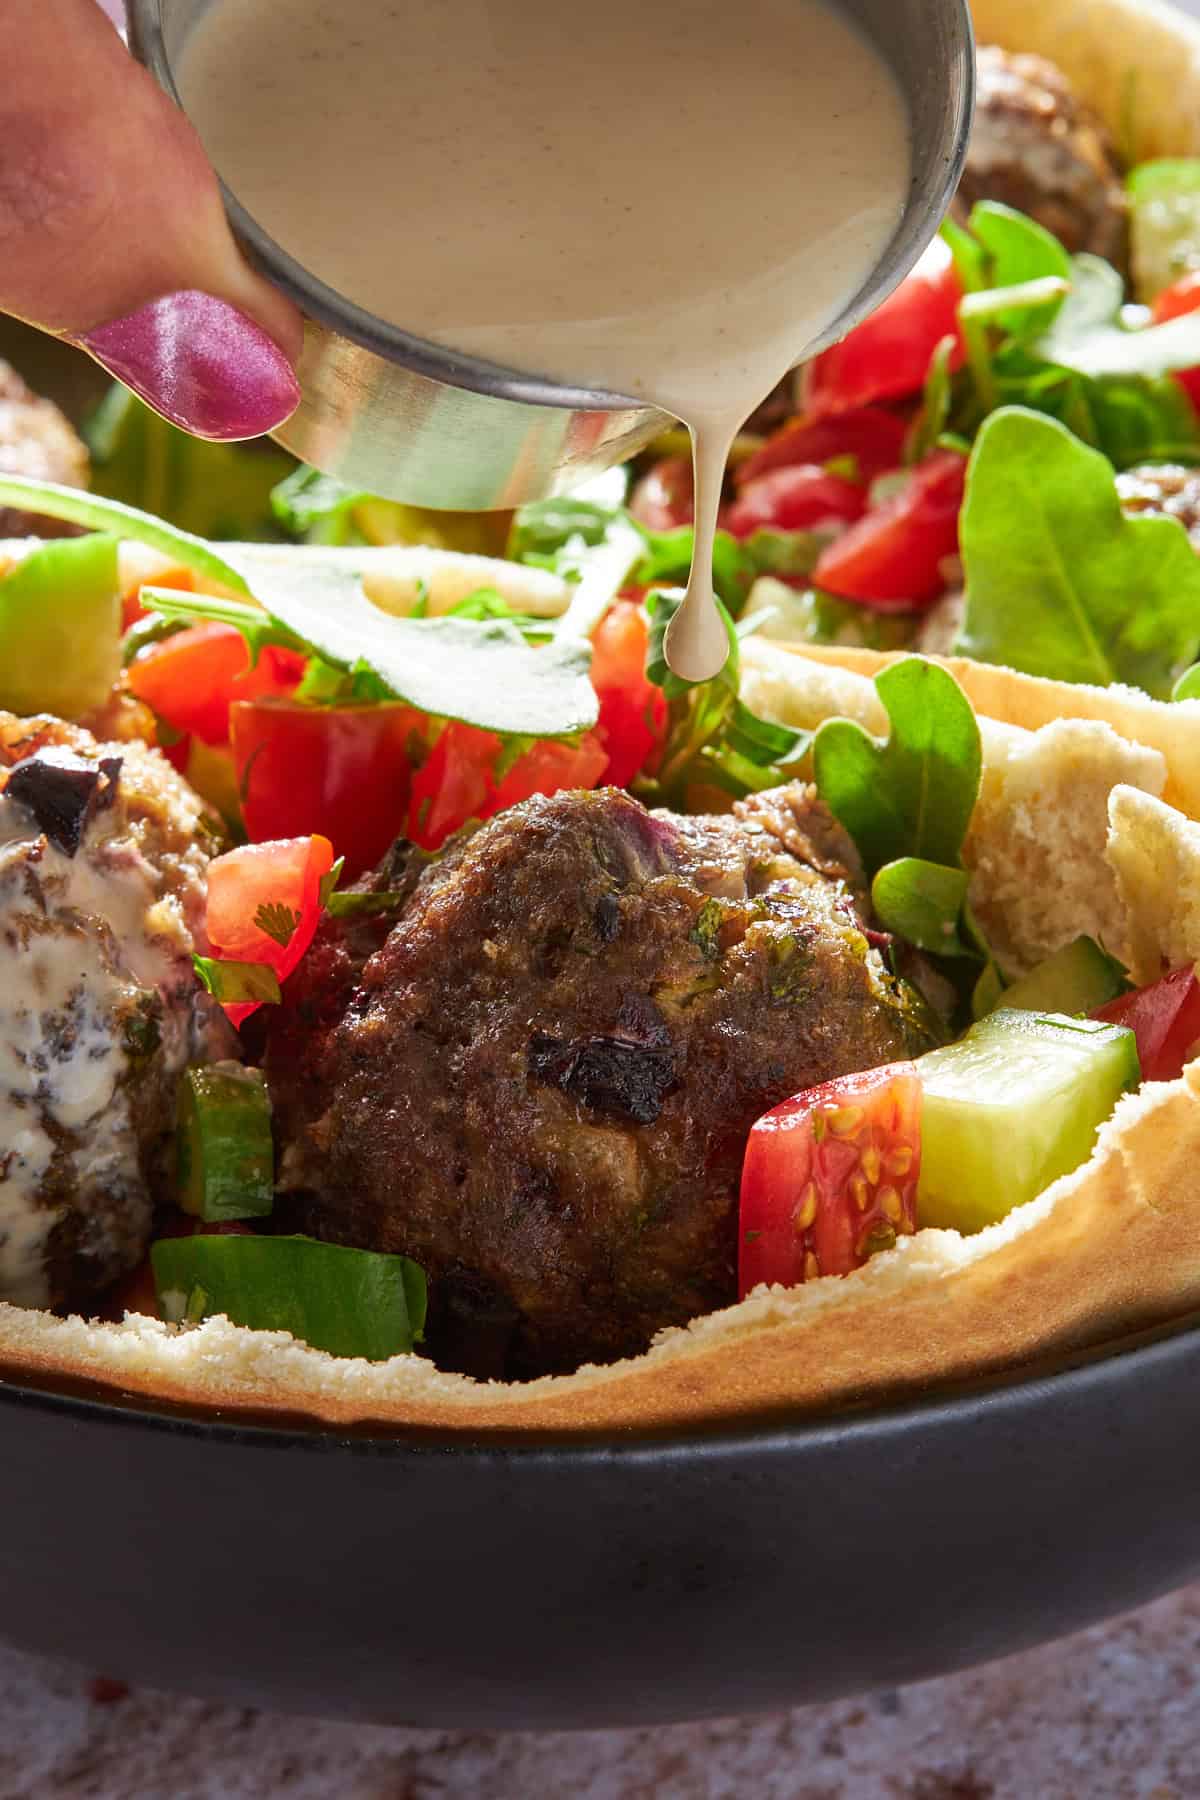 Tahini sauce being poured over a pita stuffed with Mediterranean beef meatballs and salad. 